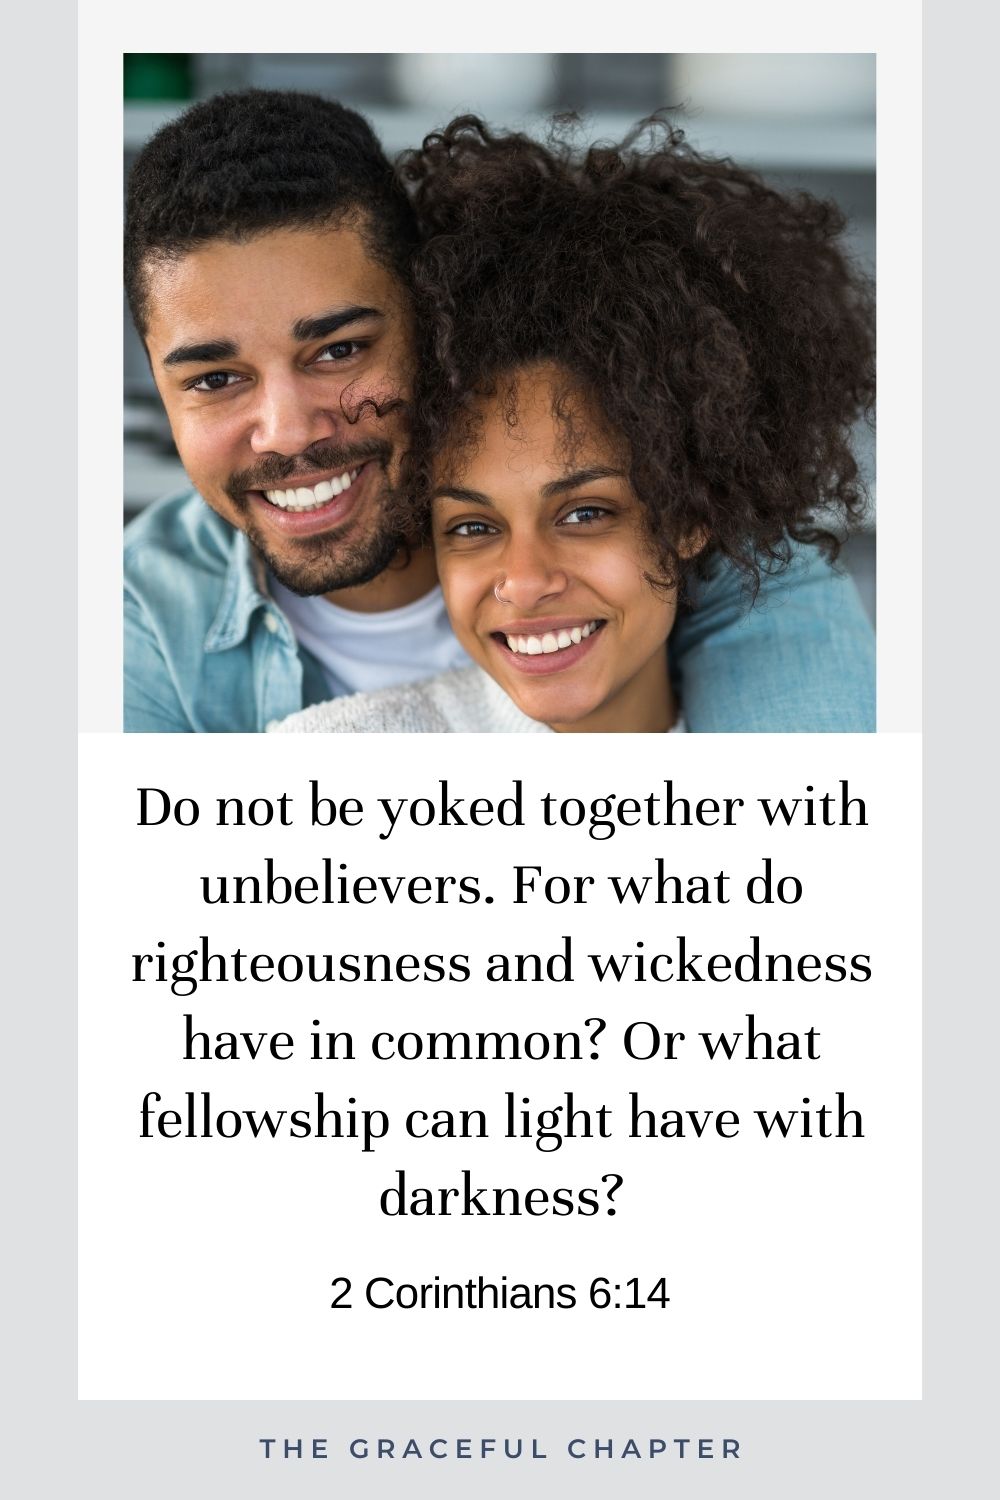 Do not be yoked together with unbelievers. For what do righteousness and wickedness have in common? Or what fellowship can light have with darkness? 2 Corinthians 6:14